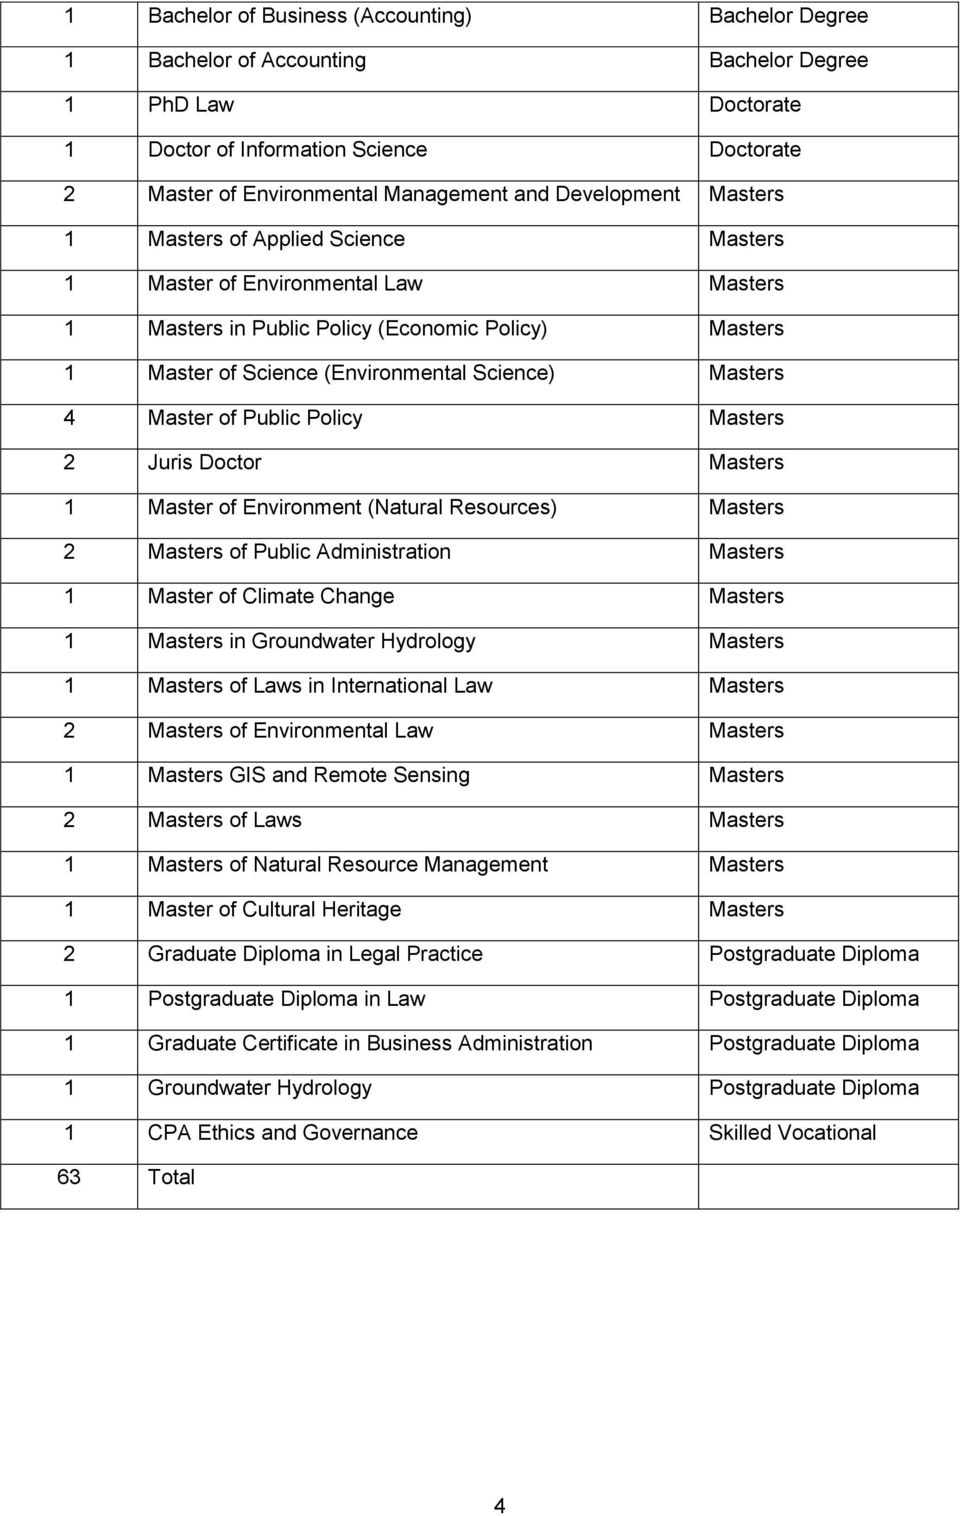 Policy Masters 2 Juris Doctor Masters Master of Environment (Natural Resources) Masters 2 Masters of Public Administration Masters Master of Climate Change Masters Masters in Groundwater Hydrology